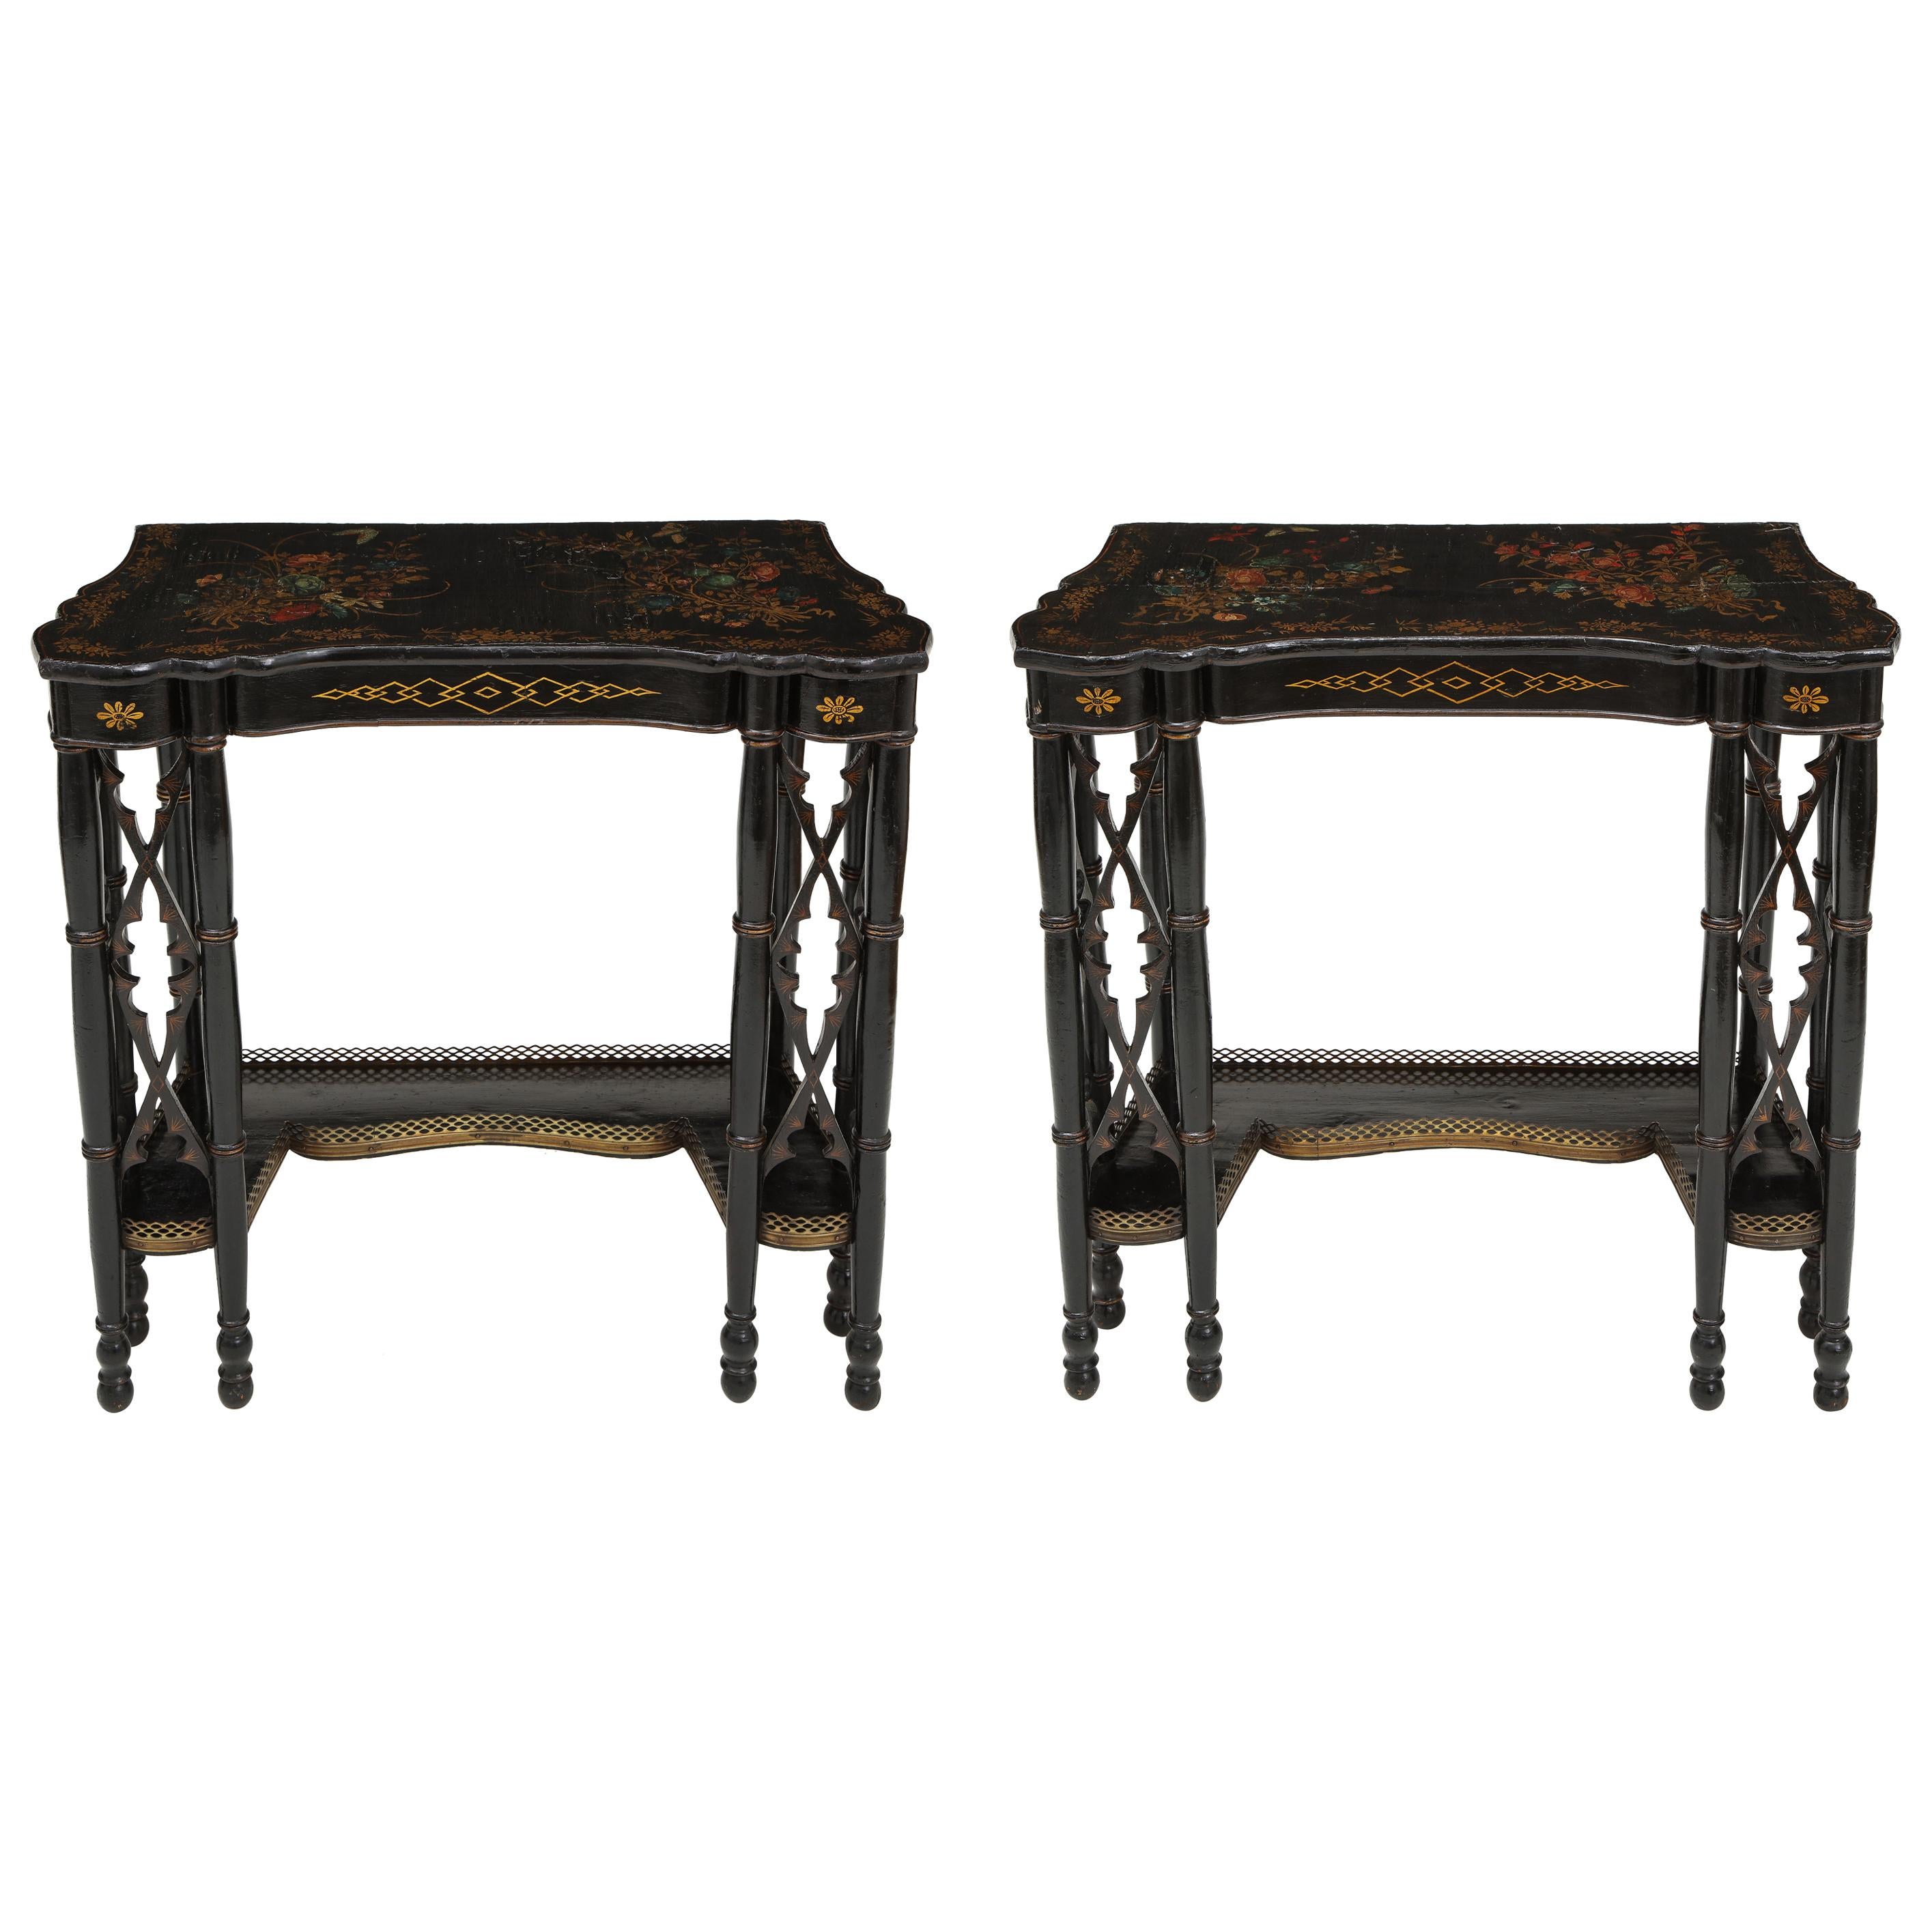 Pair of Fine Regency Black Painted and Chinese Lacquer Side Tables